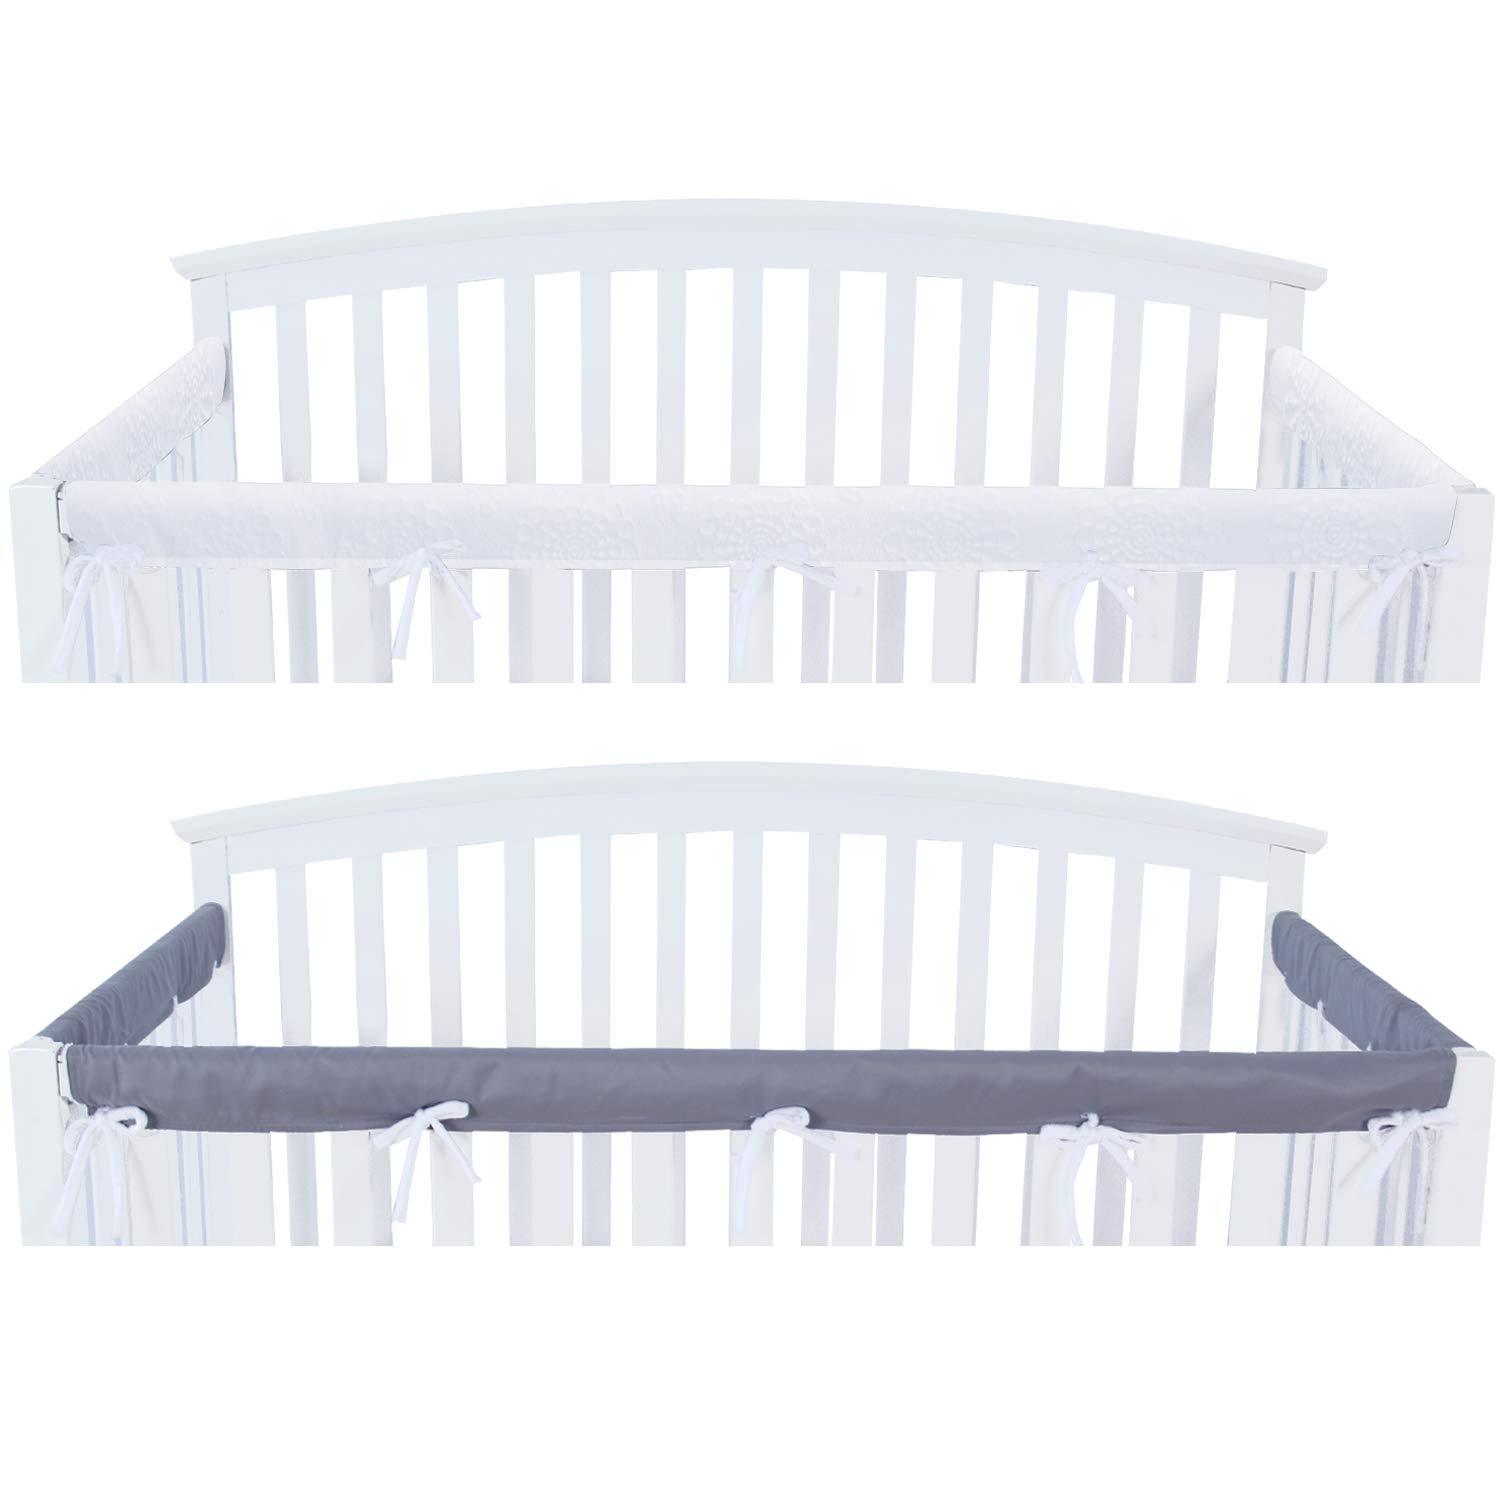 3 Pieces Crib Rail Cover - Protector Safe Teething Guard Wrap, Reversible, Fit Side and Front Rails, Grey & White - Biloban Online Store